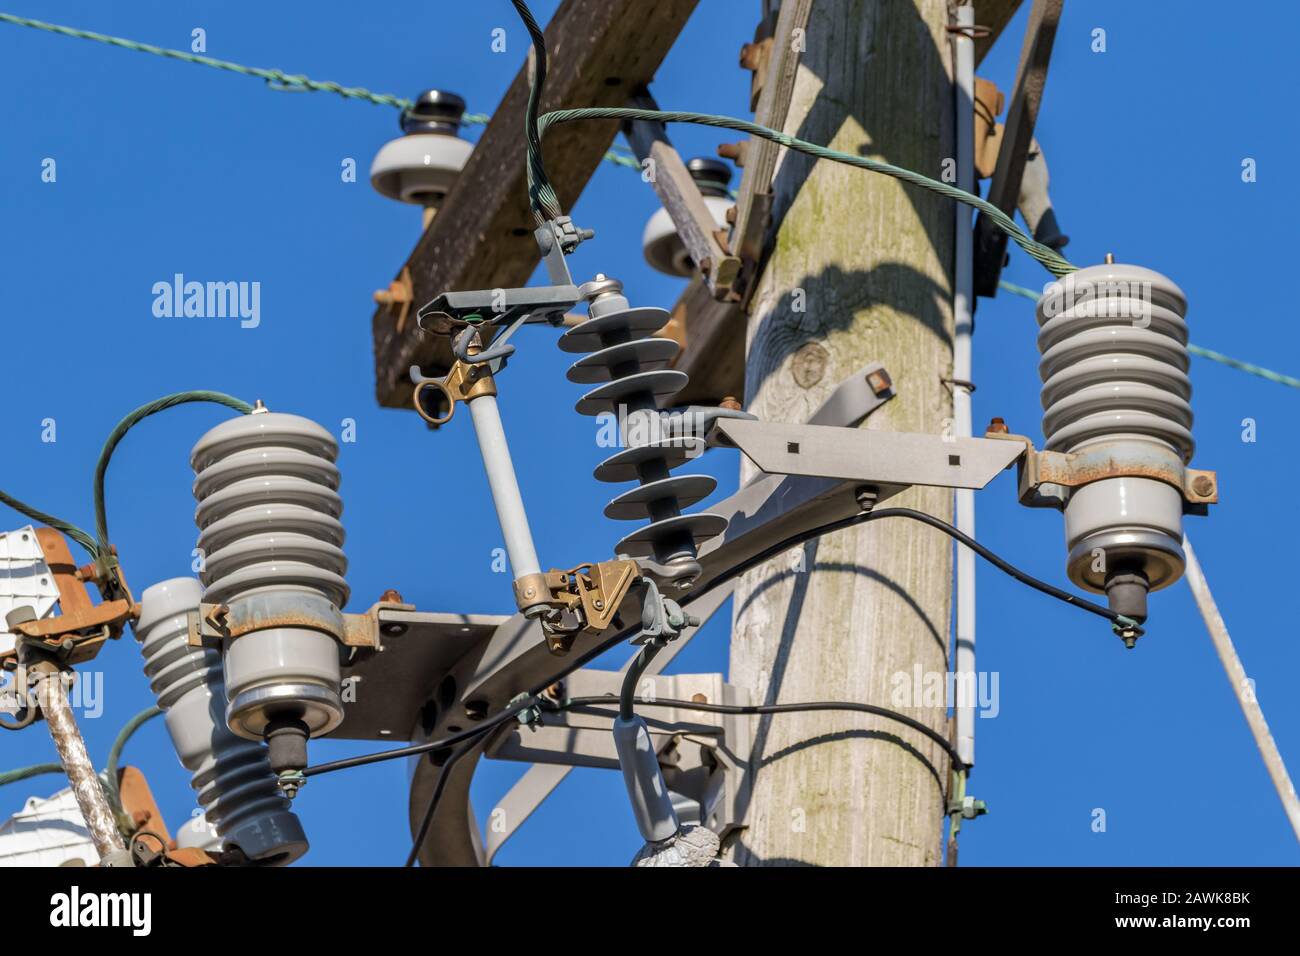 Overhead feeder power line on pole with fuse cutout switch for electrical utility distribution circuit overload and surge protection Stock Photo